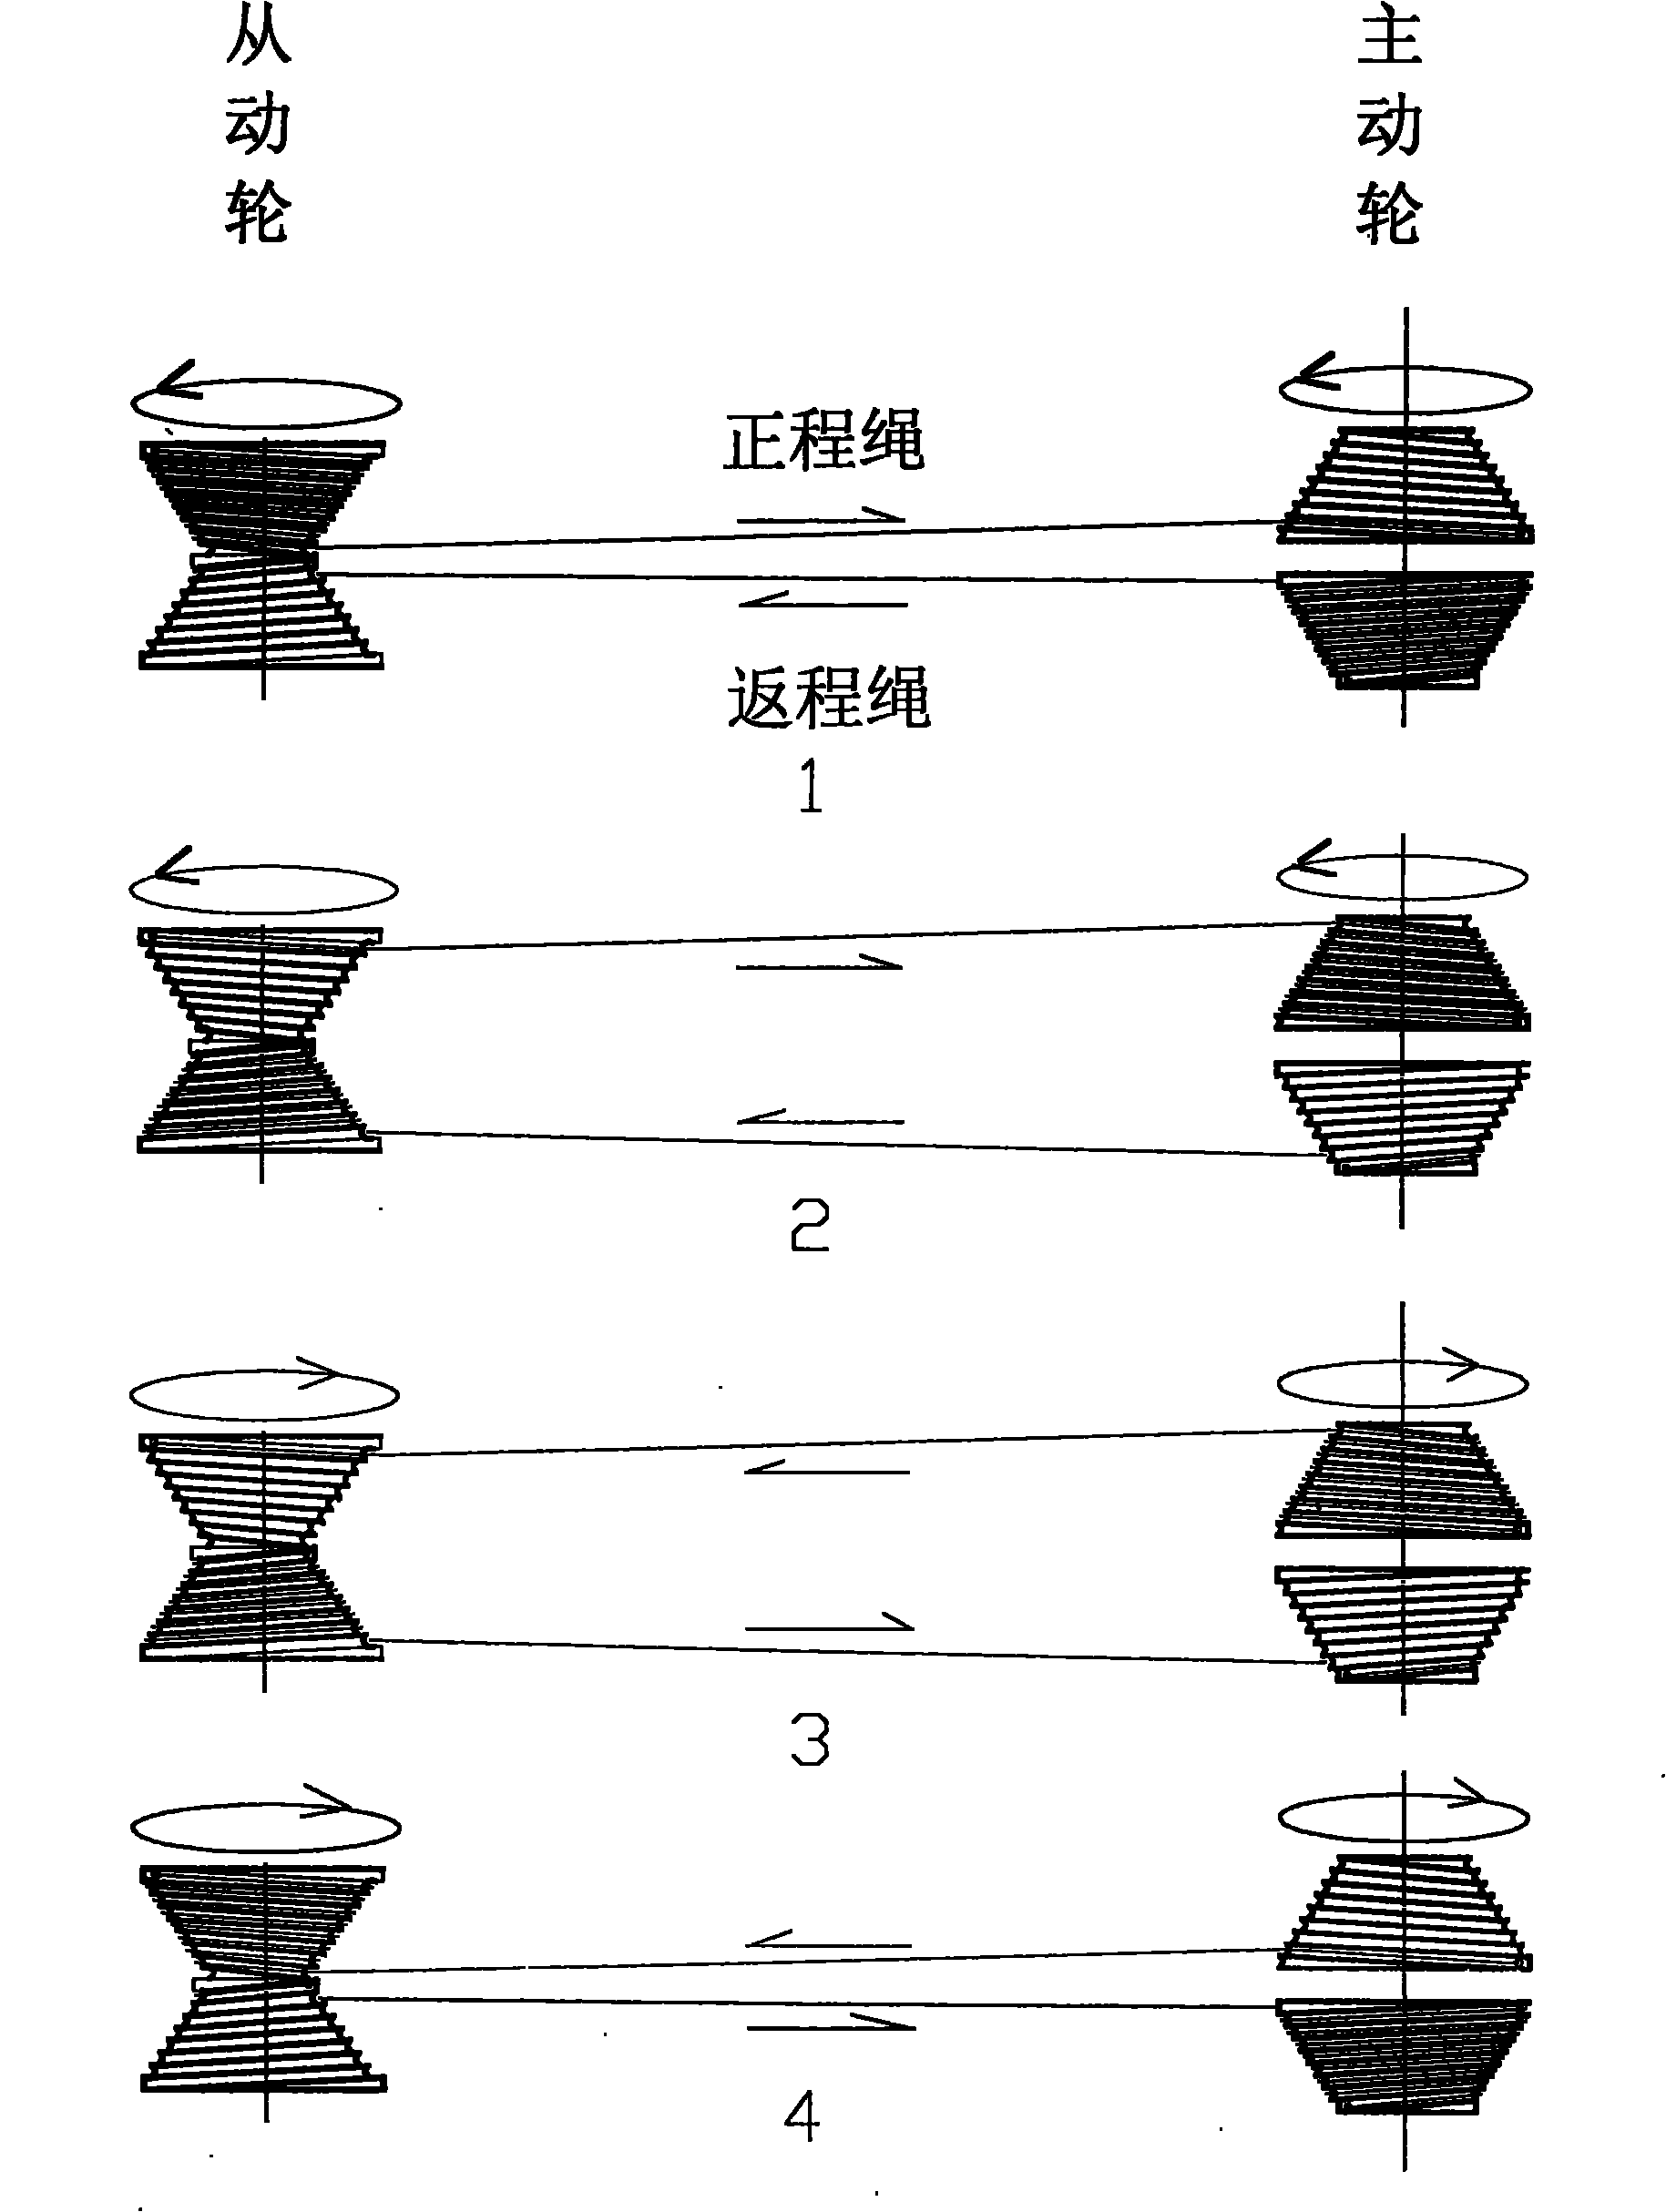 Window wiper capable of multi-point positioning and reciprocated rotating